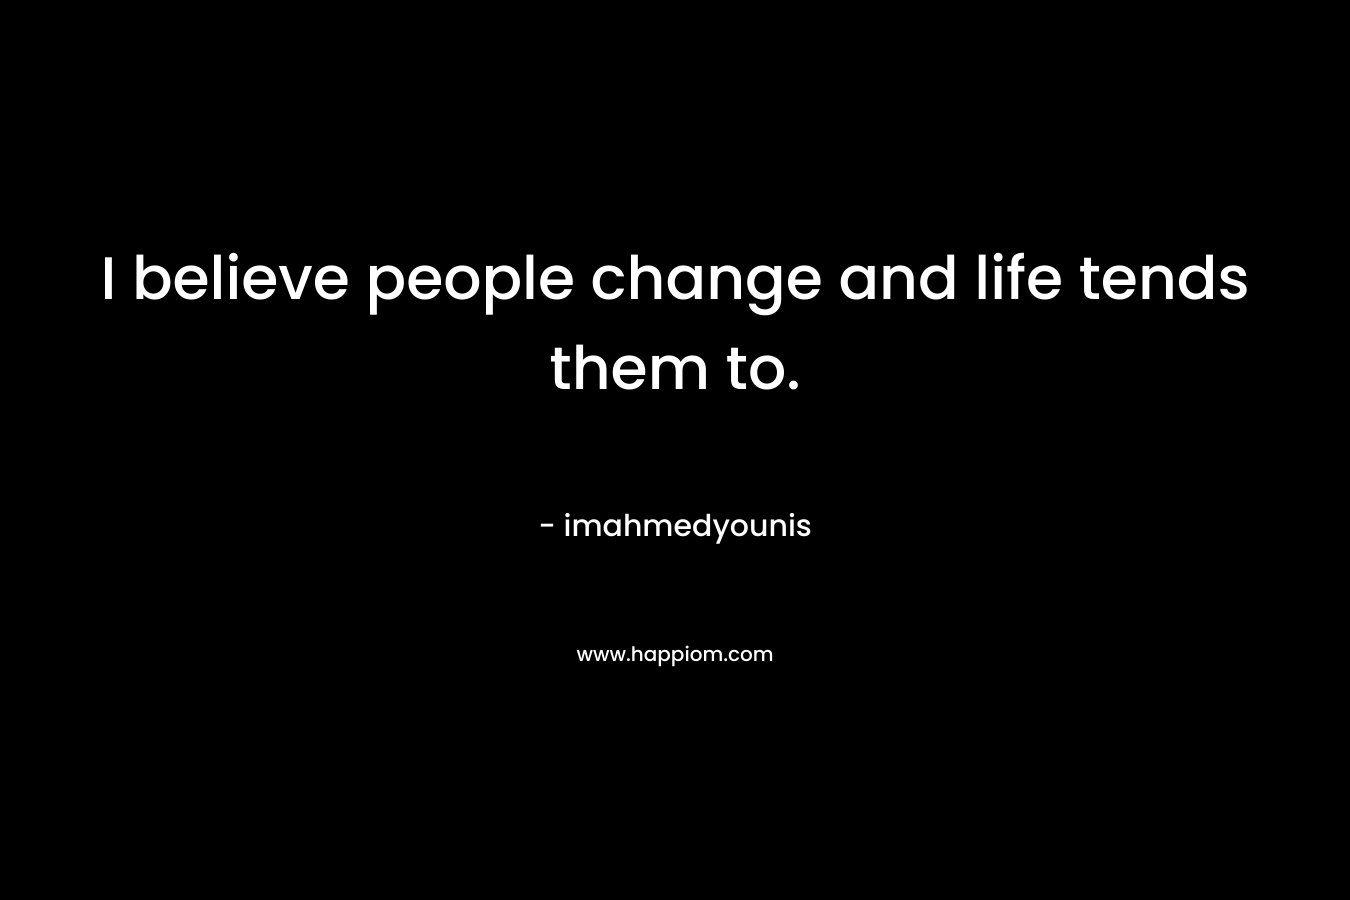 I believe people change and life tends them to. – imahmedyounis